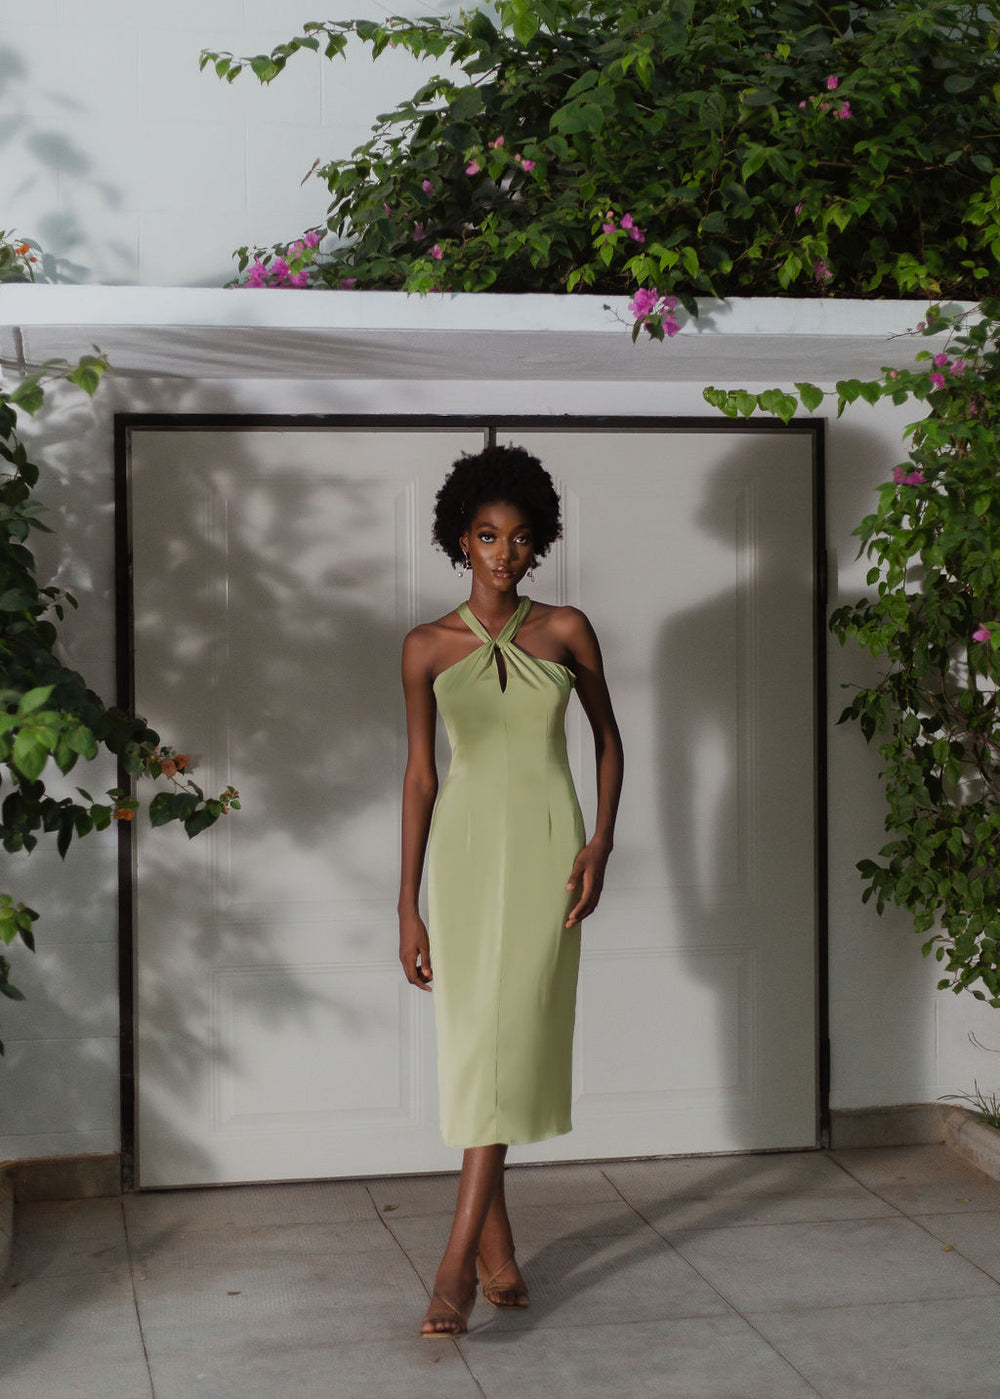 A model wearing an olive halter neck dress in front of a house